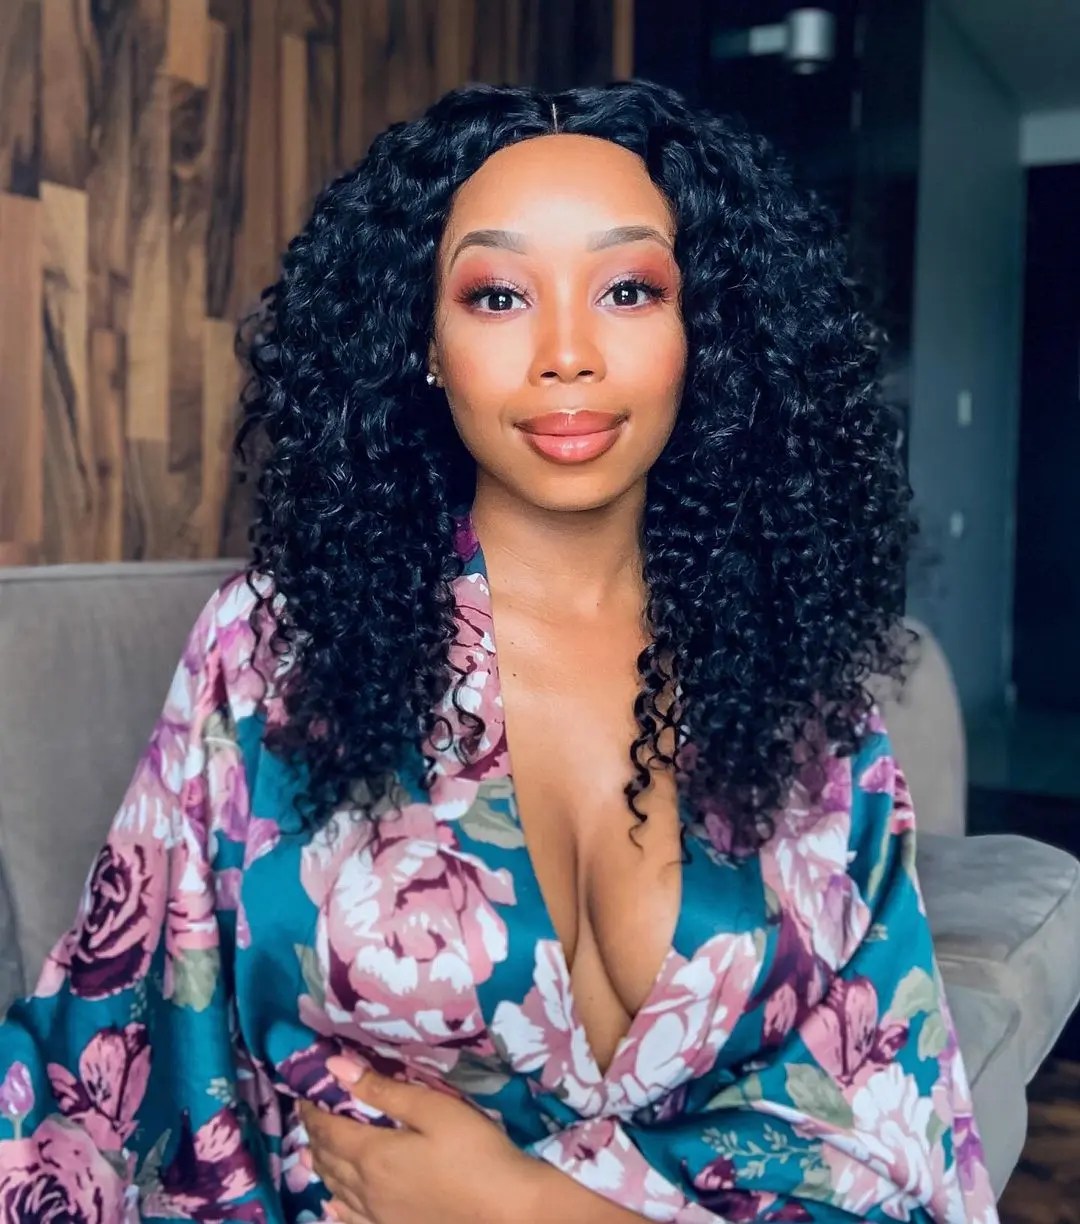 Candice Modiselle launches YouTube channel – Here’s why